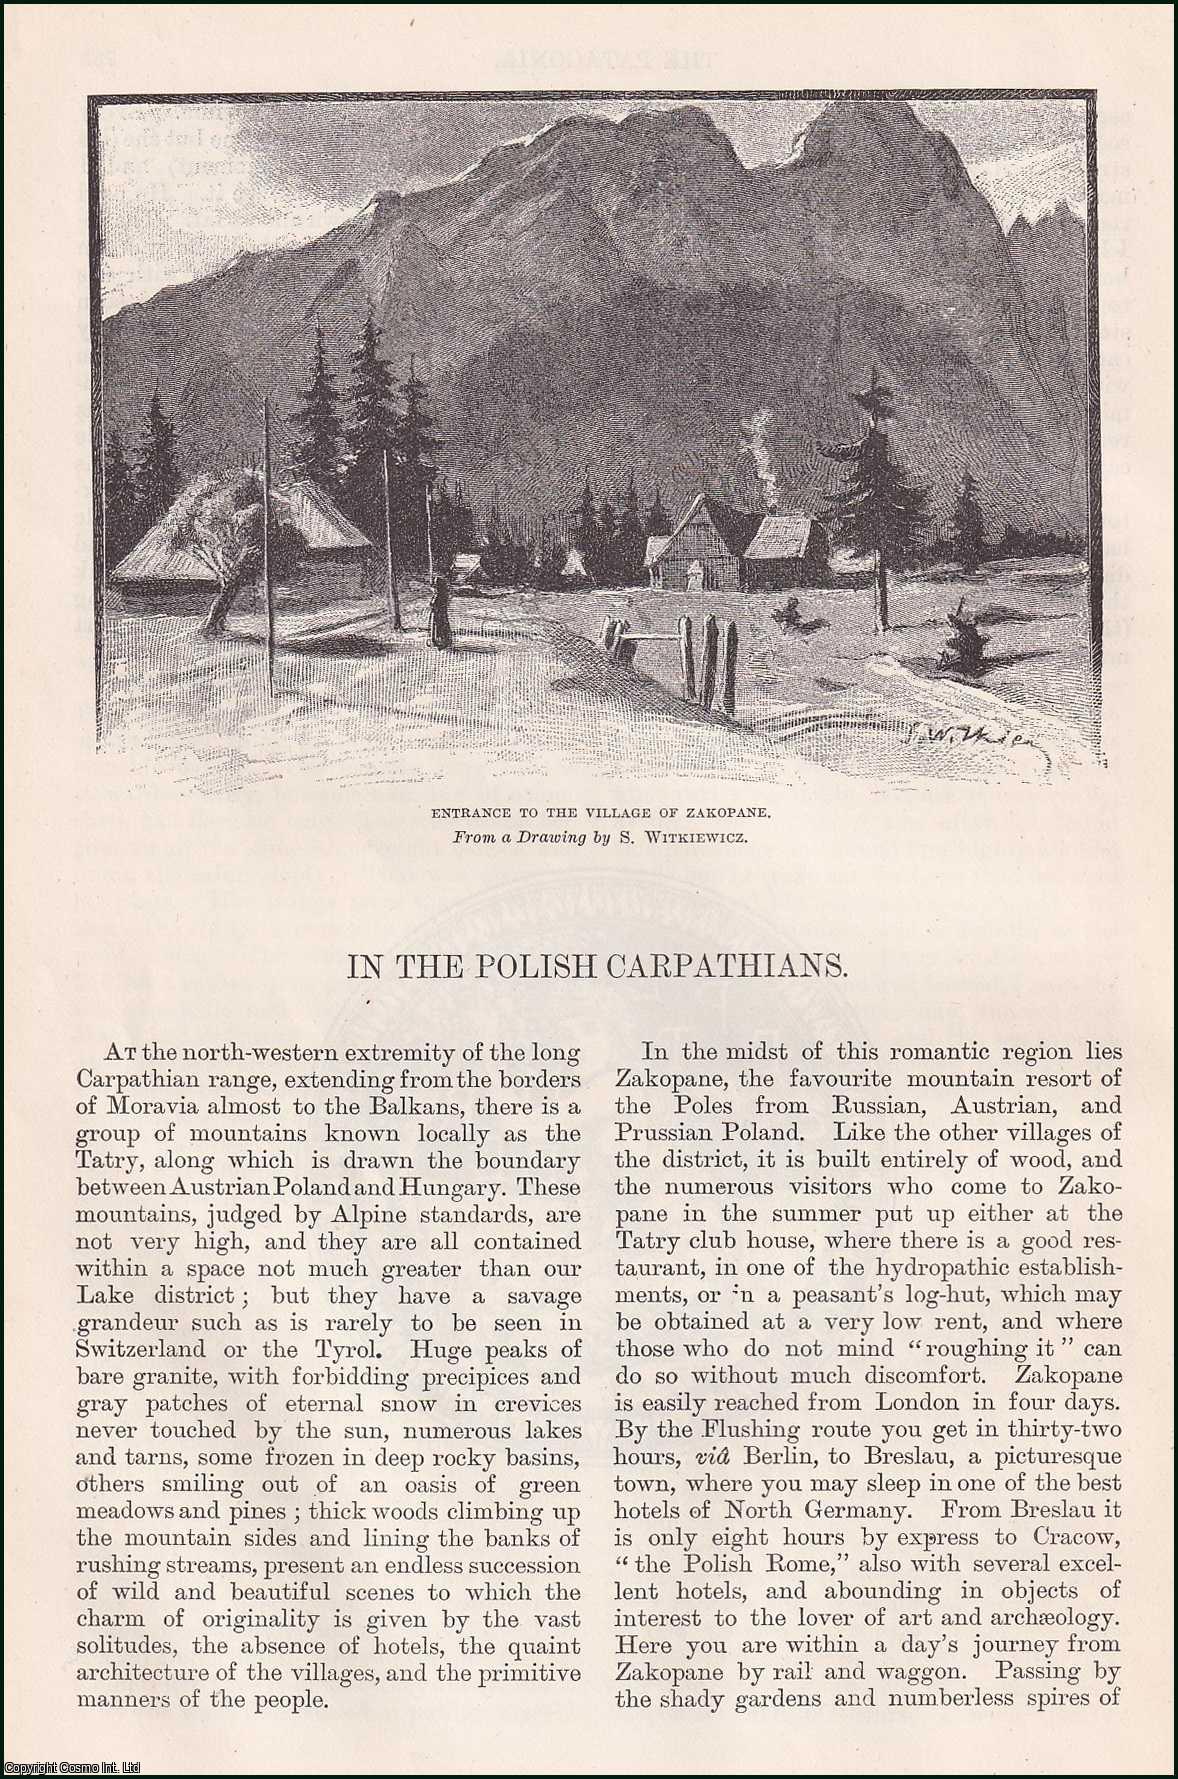 Adam Gielgud, Illustrations by S. Witkiewicz - In the Polish Carpathian Mountains. An original article from the English Illustrated Magazine, 1888.